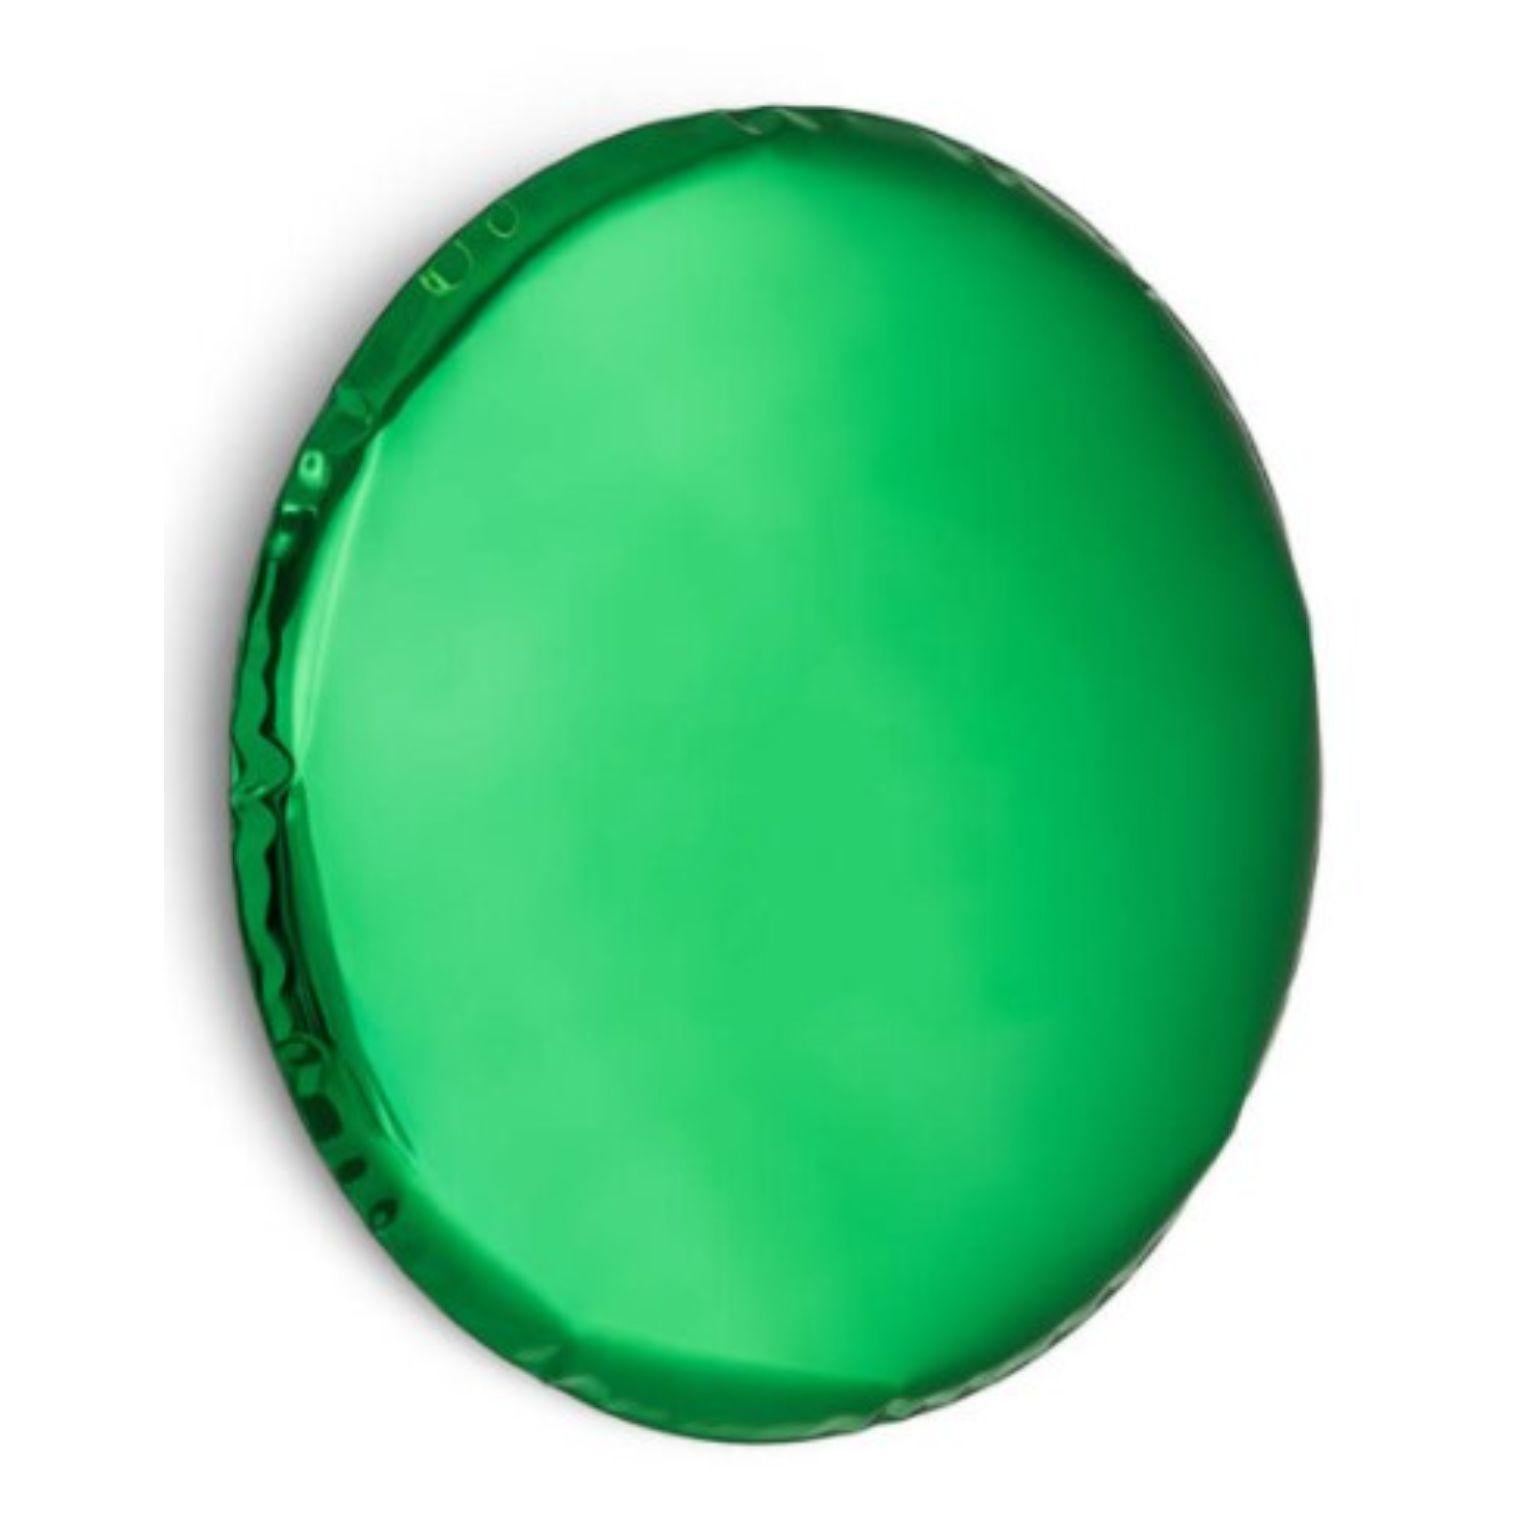 Emerald Oko 75 sculptural wall mirror by Zieta
Dimensions: Diameter 75 x D 6 cm 
Material: Stainless steel. 
Finish: Emerald.
Available in finishes: Stainless Steel, Deep Space Blue, Emerald, Saphire, Saphire/Emerald, Dark Matter, and Red Rubin.